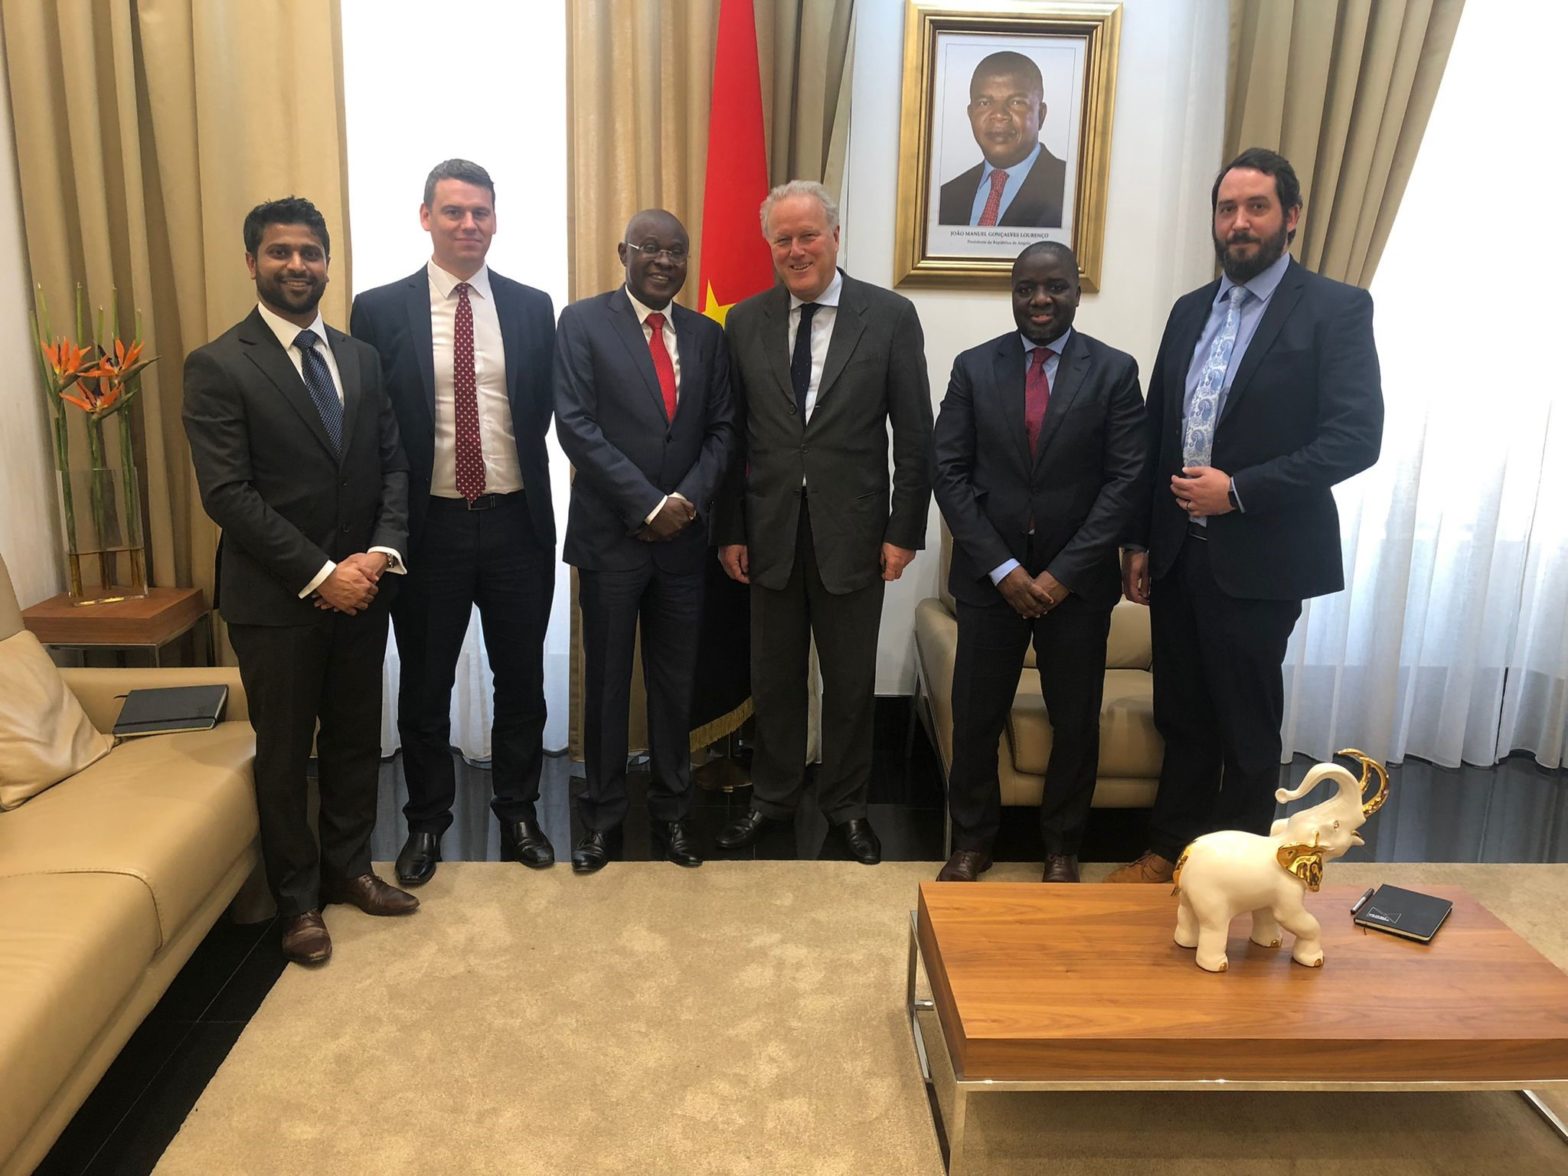 Lord Marland concludes successful trip to Angola where he meets with government ministers to strengthen Commonwealth ties”